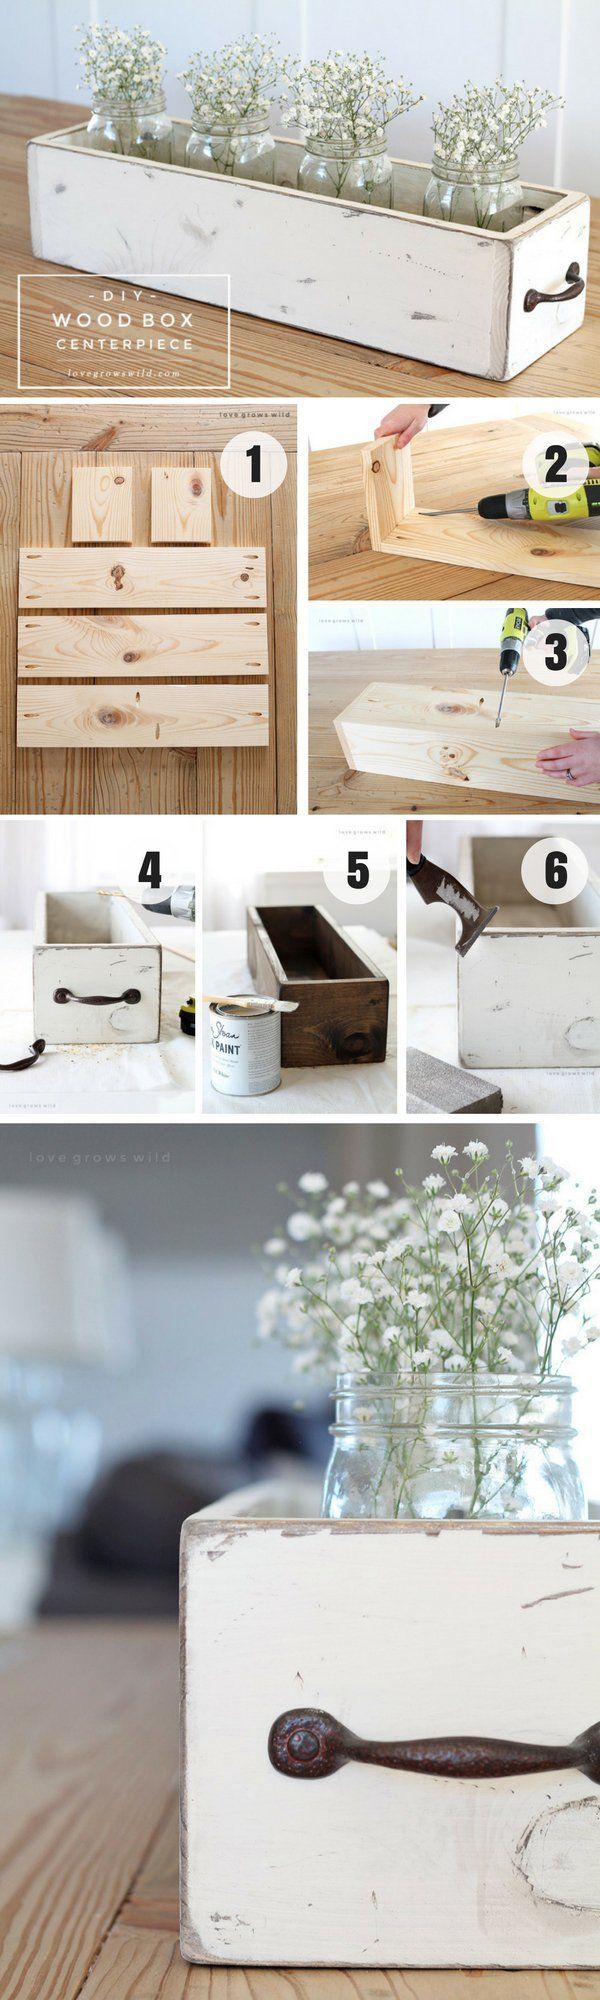 Check out how to build an easy DIY Wood Box Centerpiece @Industry Standard Design